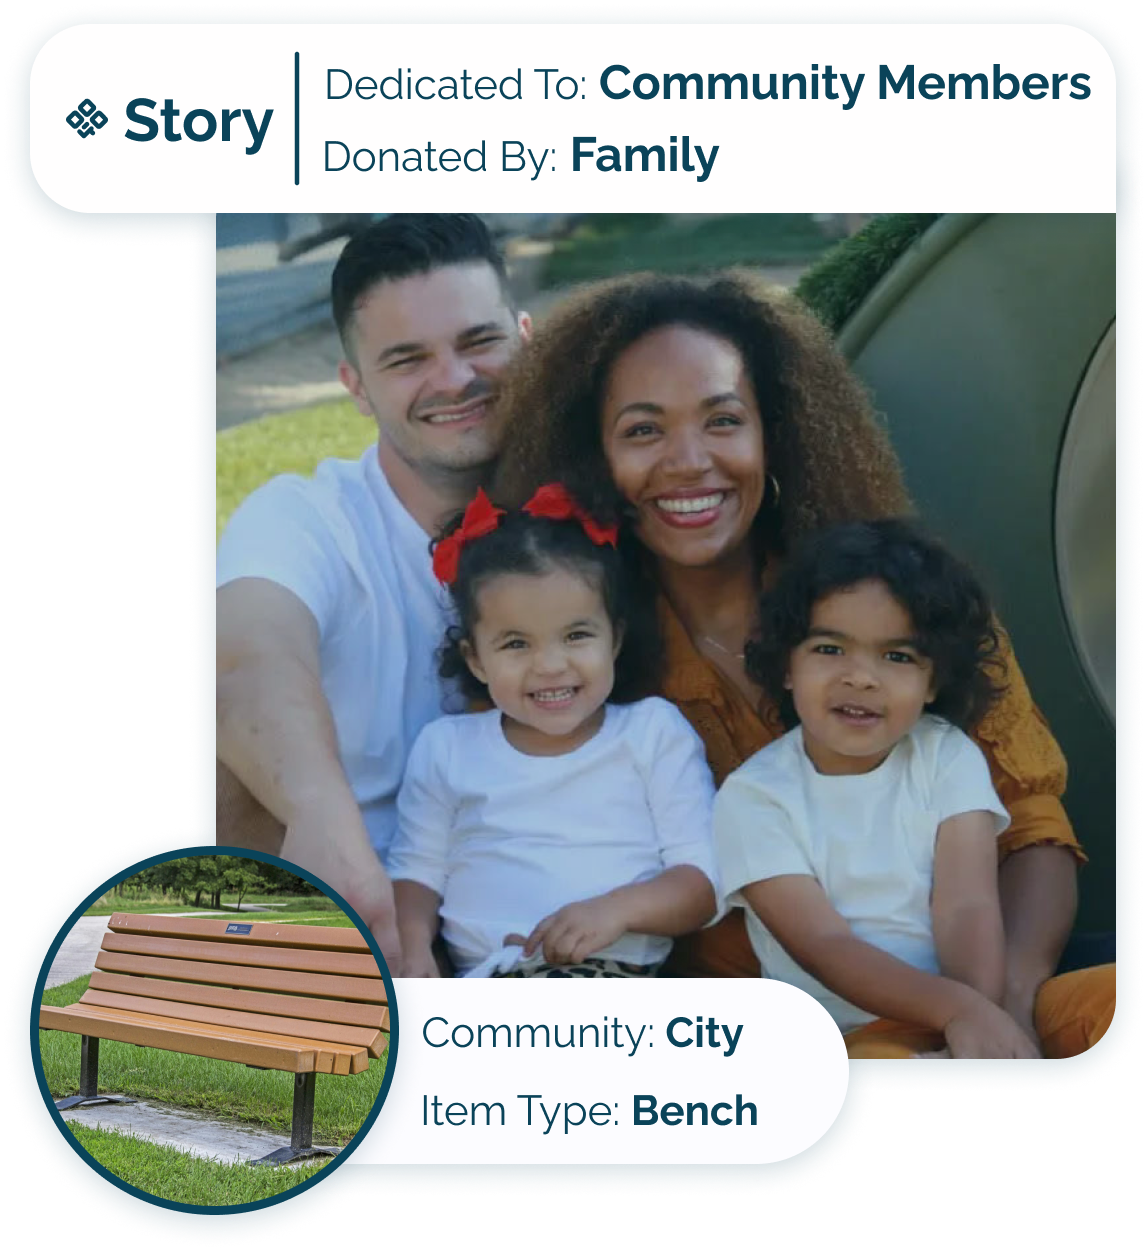 Story Card - City - Family loves city, mom is on city council, they are grateful for city